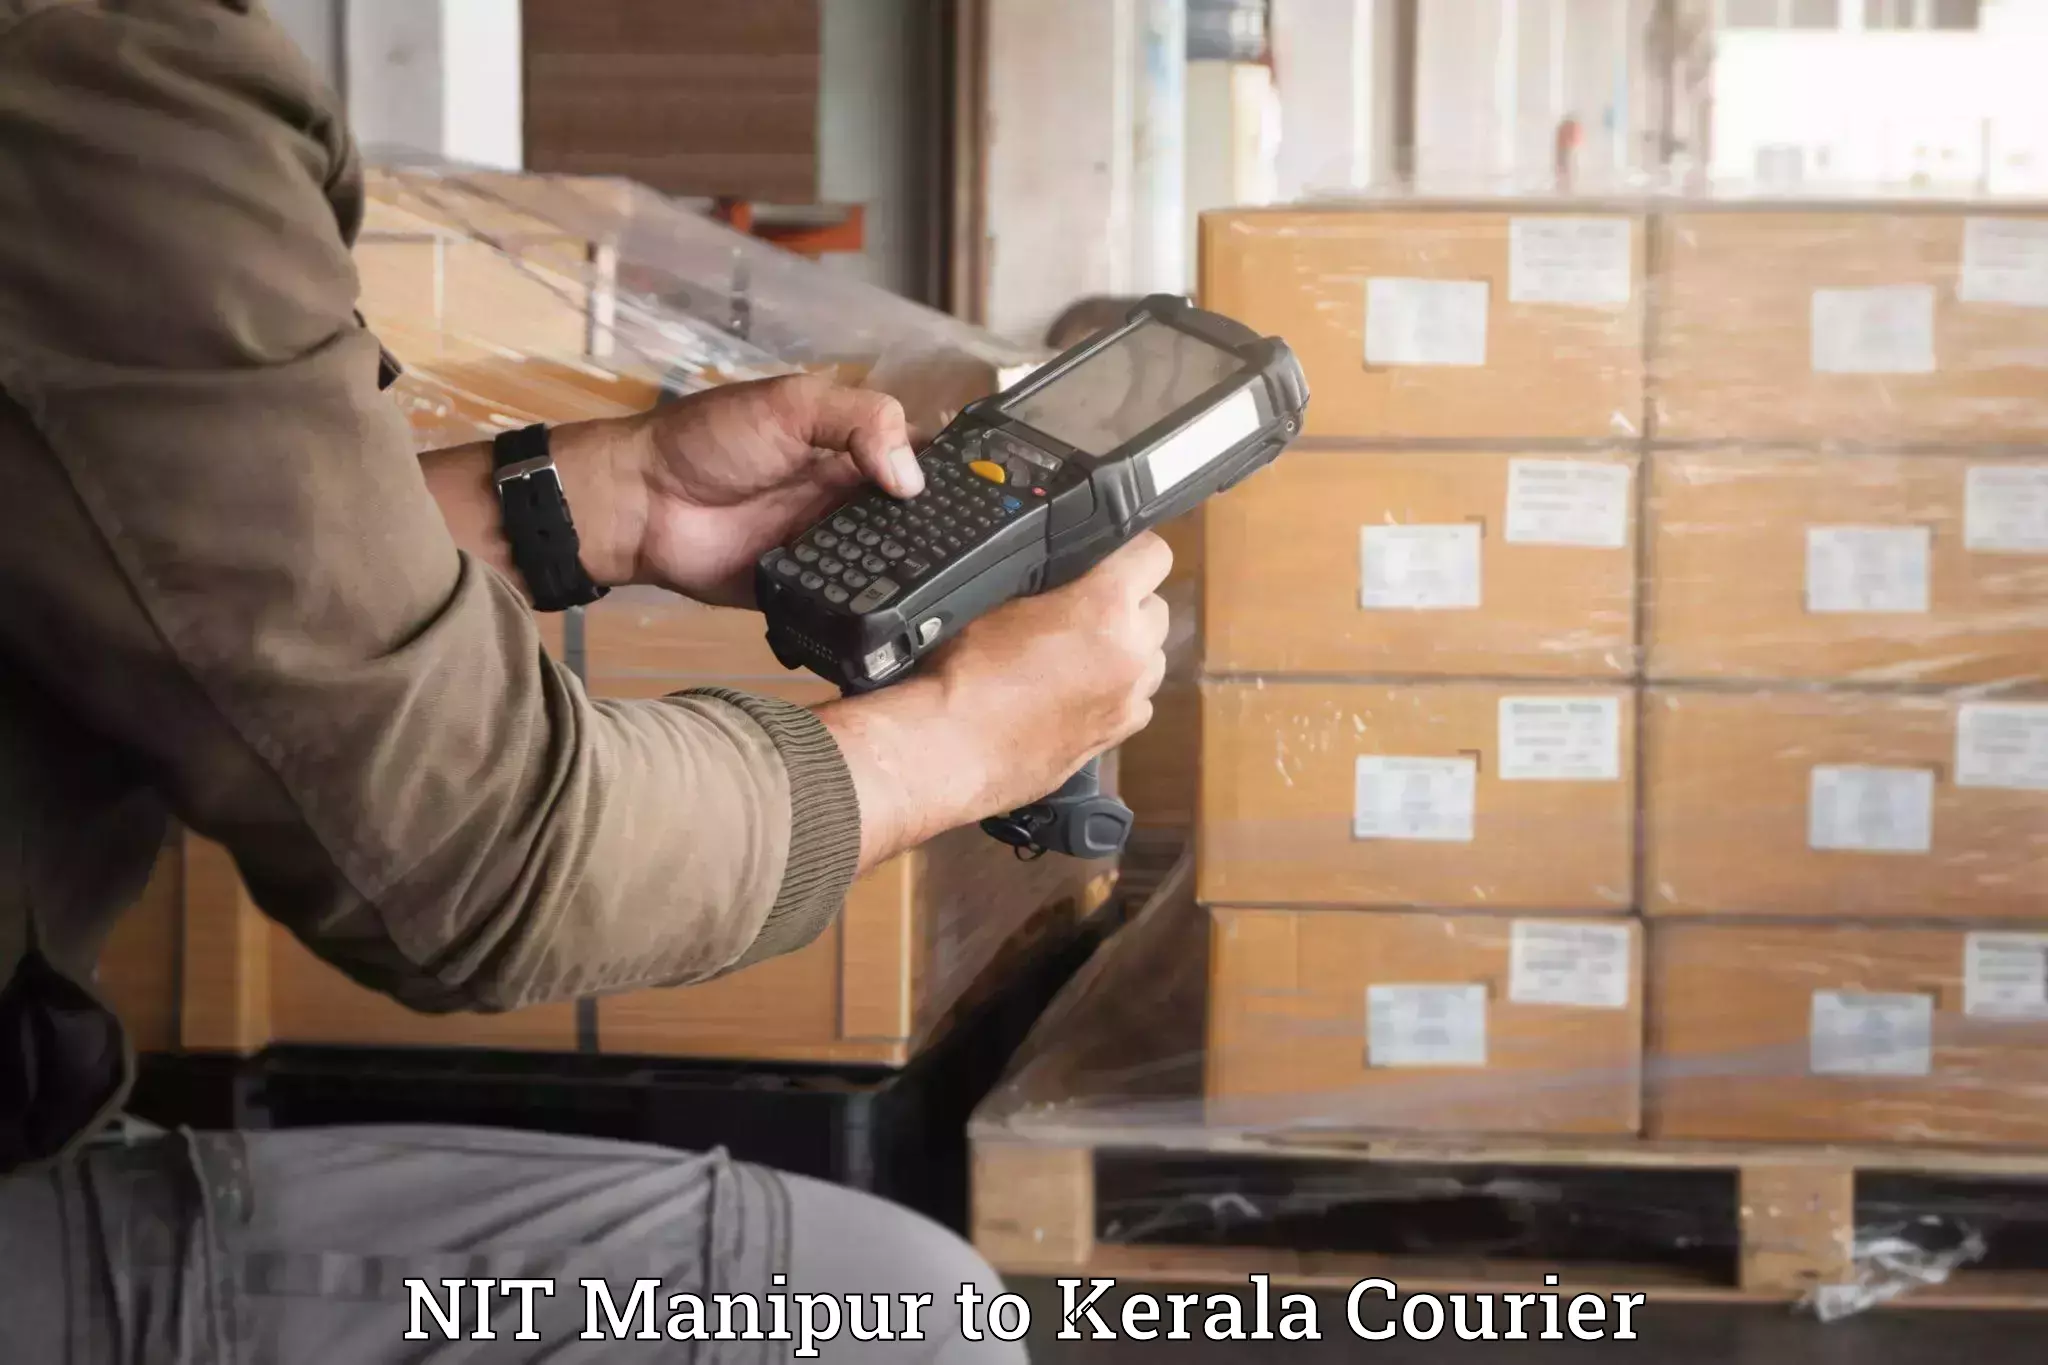 Luggage transport consultancy NIT Manipur to Kottayam